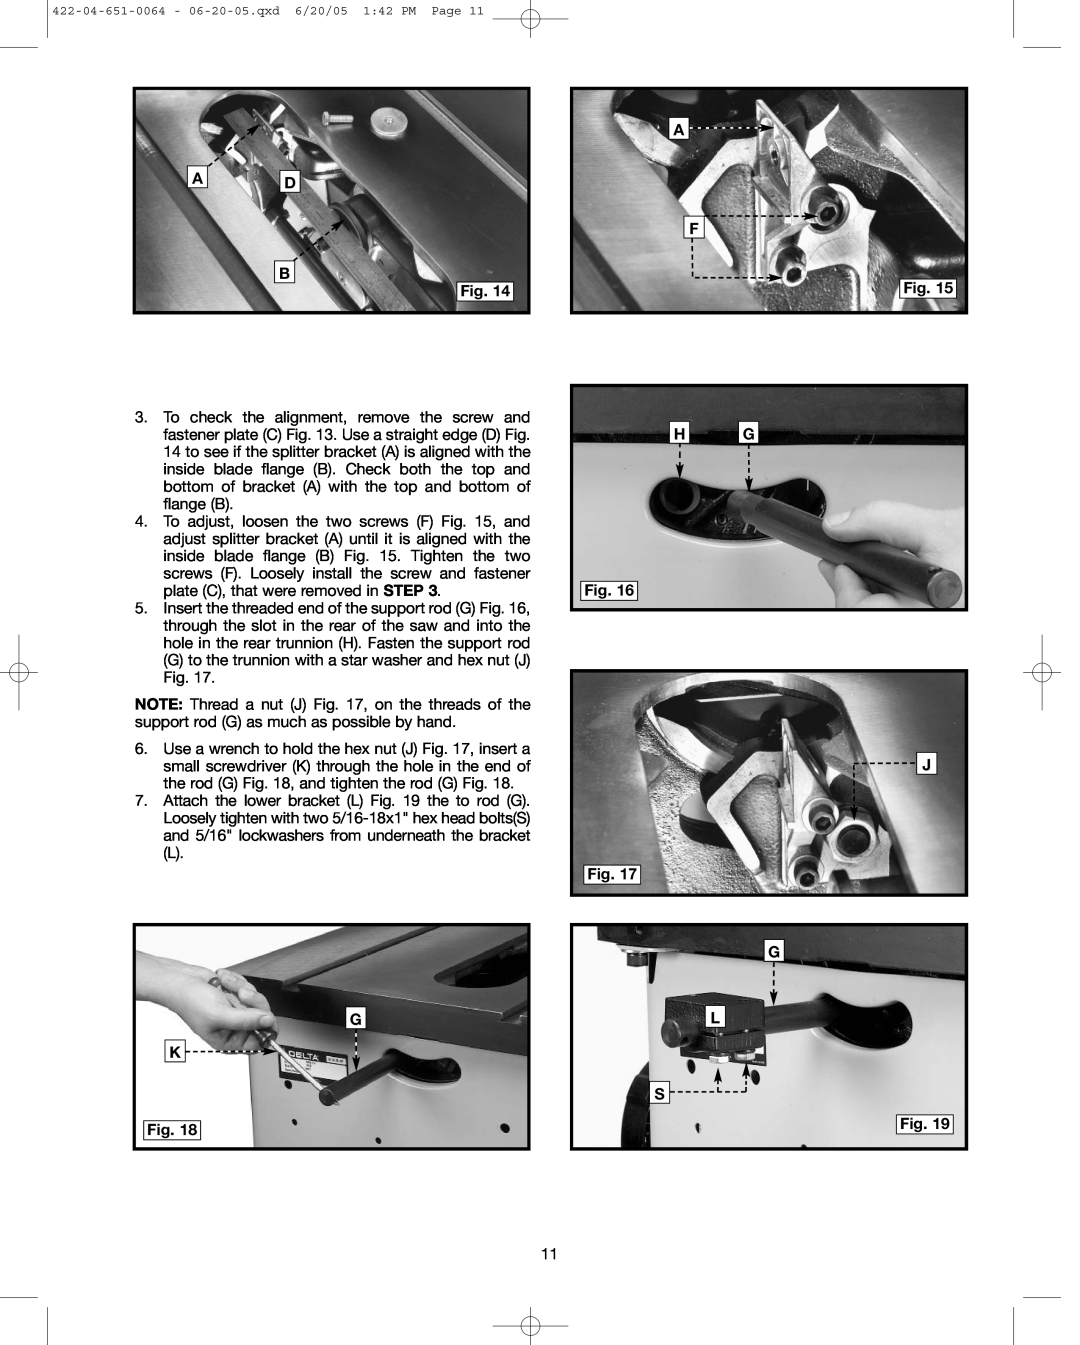 Delta 34-801, 34-814, 34-806 instruction manual G L S, G to the trunnion with a star washer and hex nut J Fig 